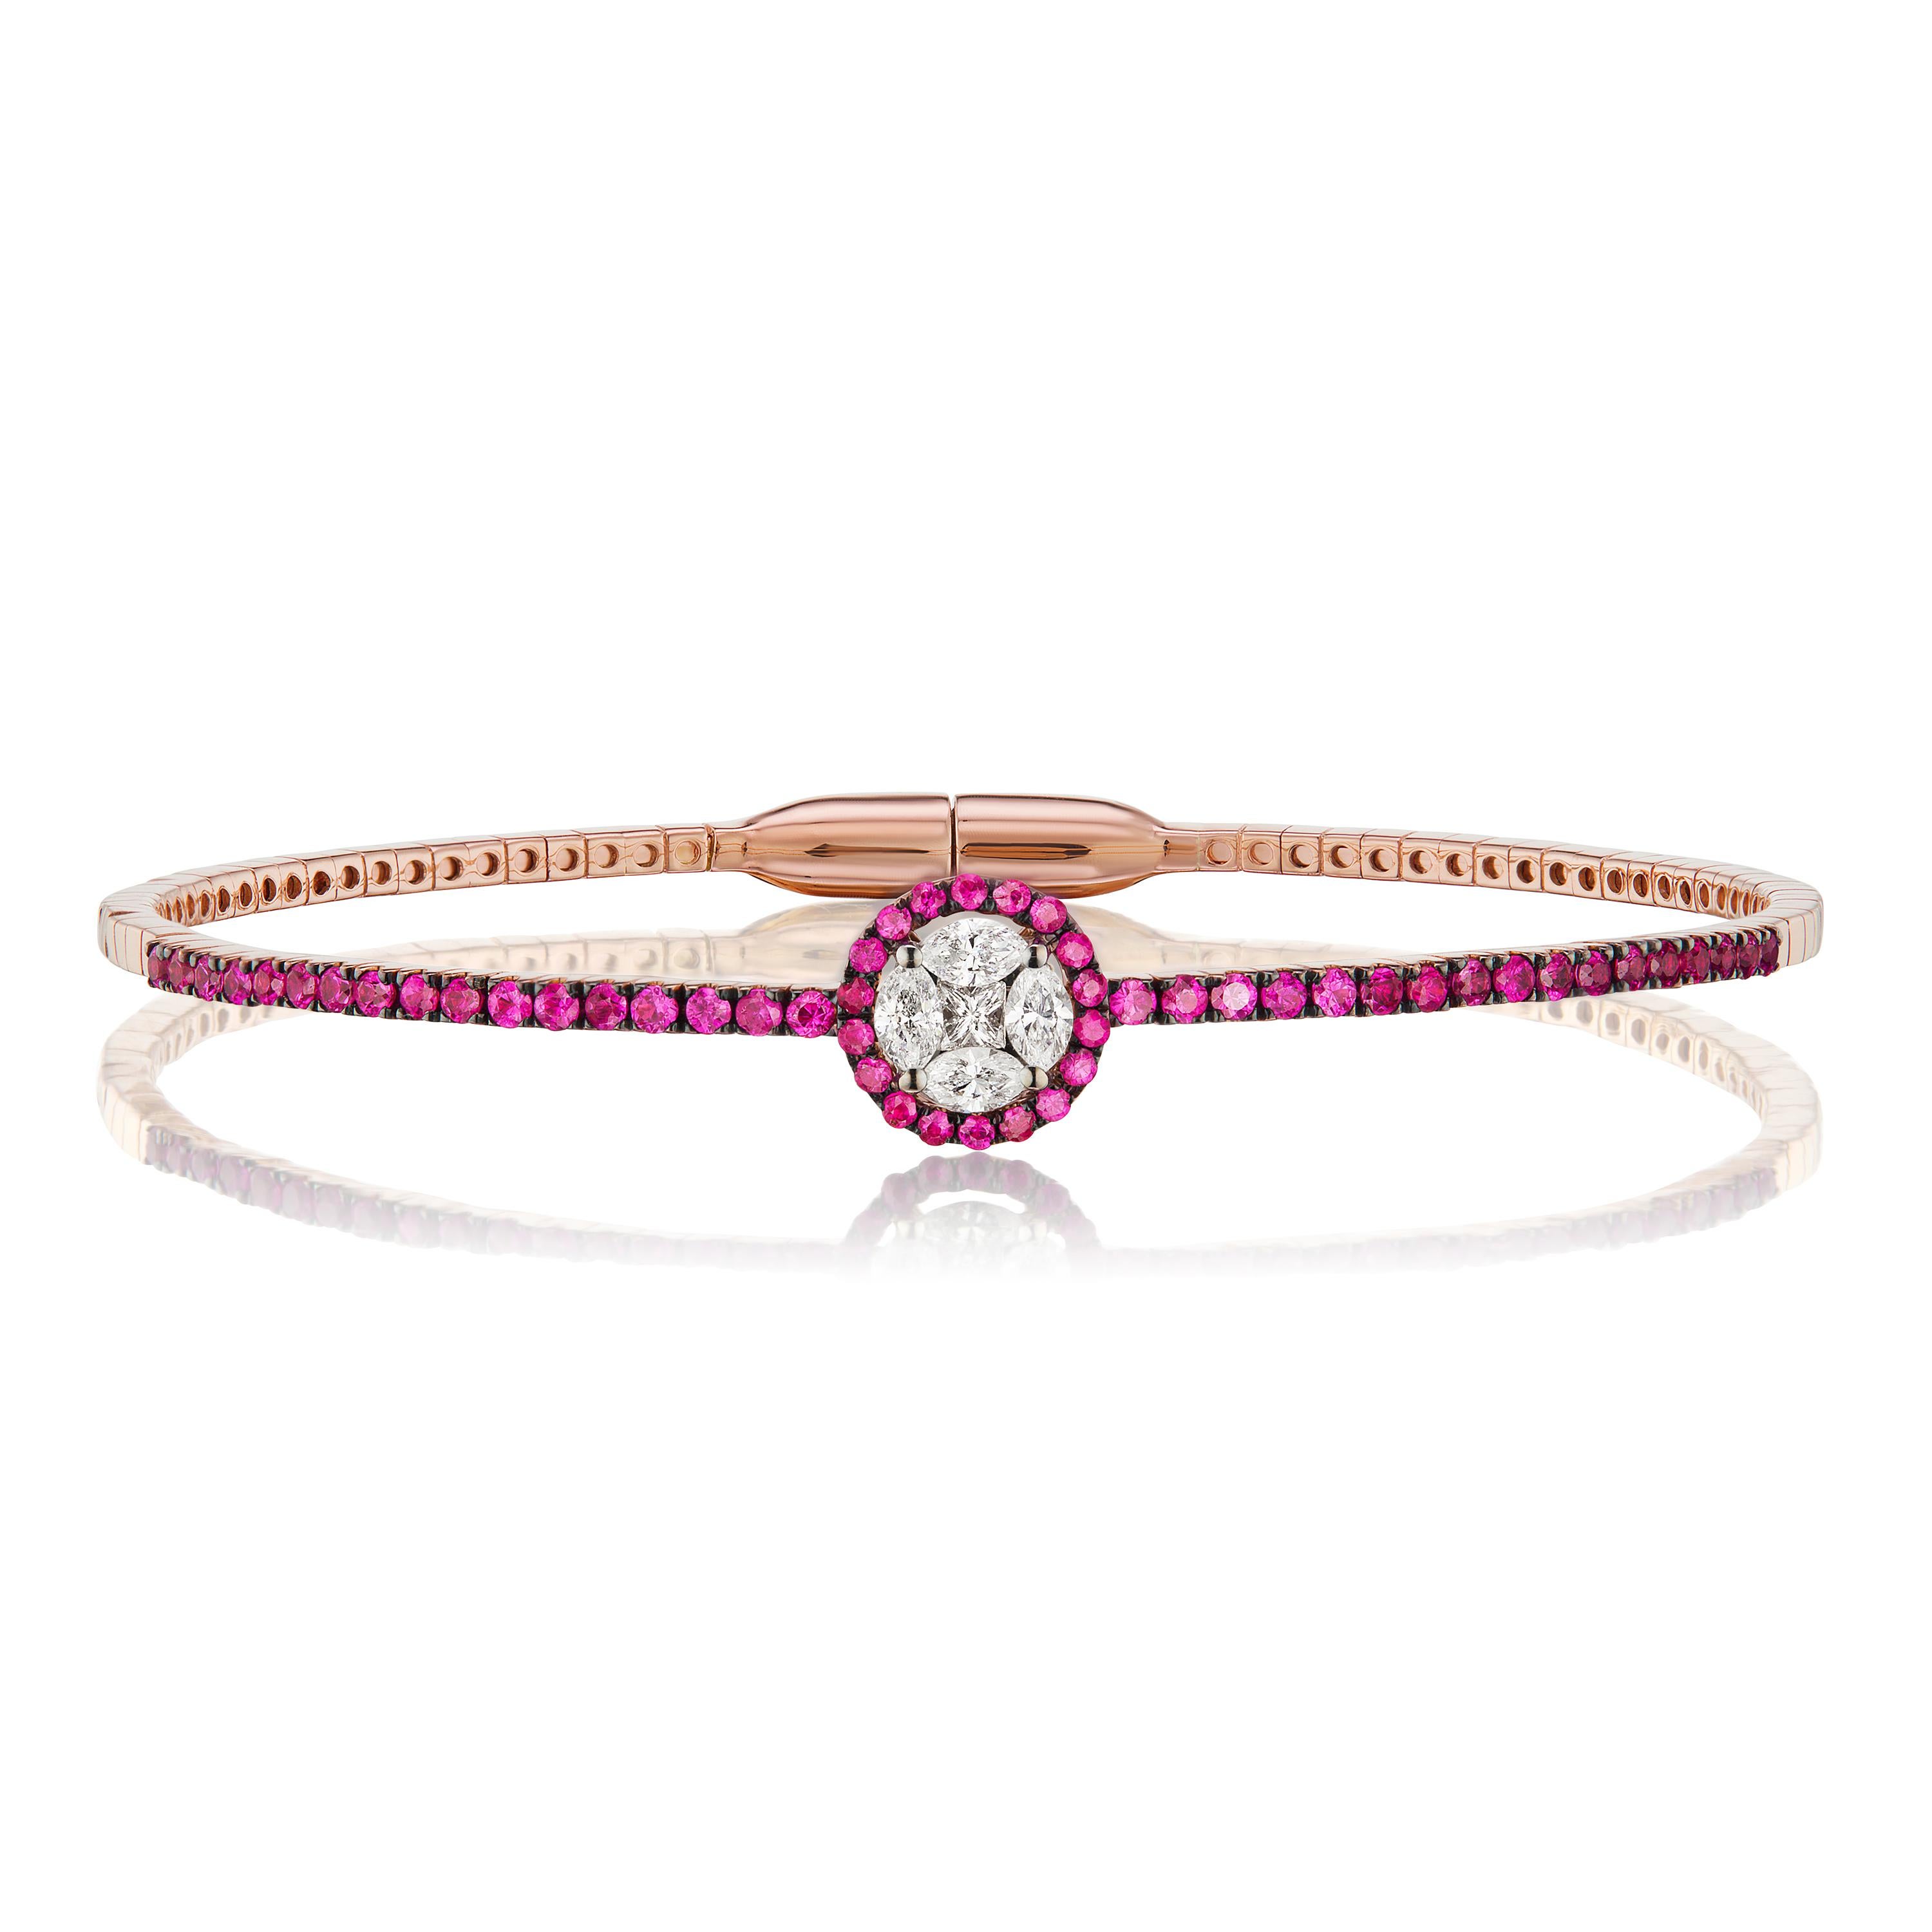 The lovely bangle is made by Gemistry of 18K rose gold and set with a 0.75-carat round-cut ruby. The marquise and square-cut diamonds are only embedded in the middle portion of the bangle. With SI1 clarity and G-H color grade, it's a lovely wrist